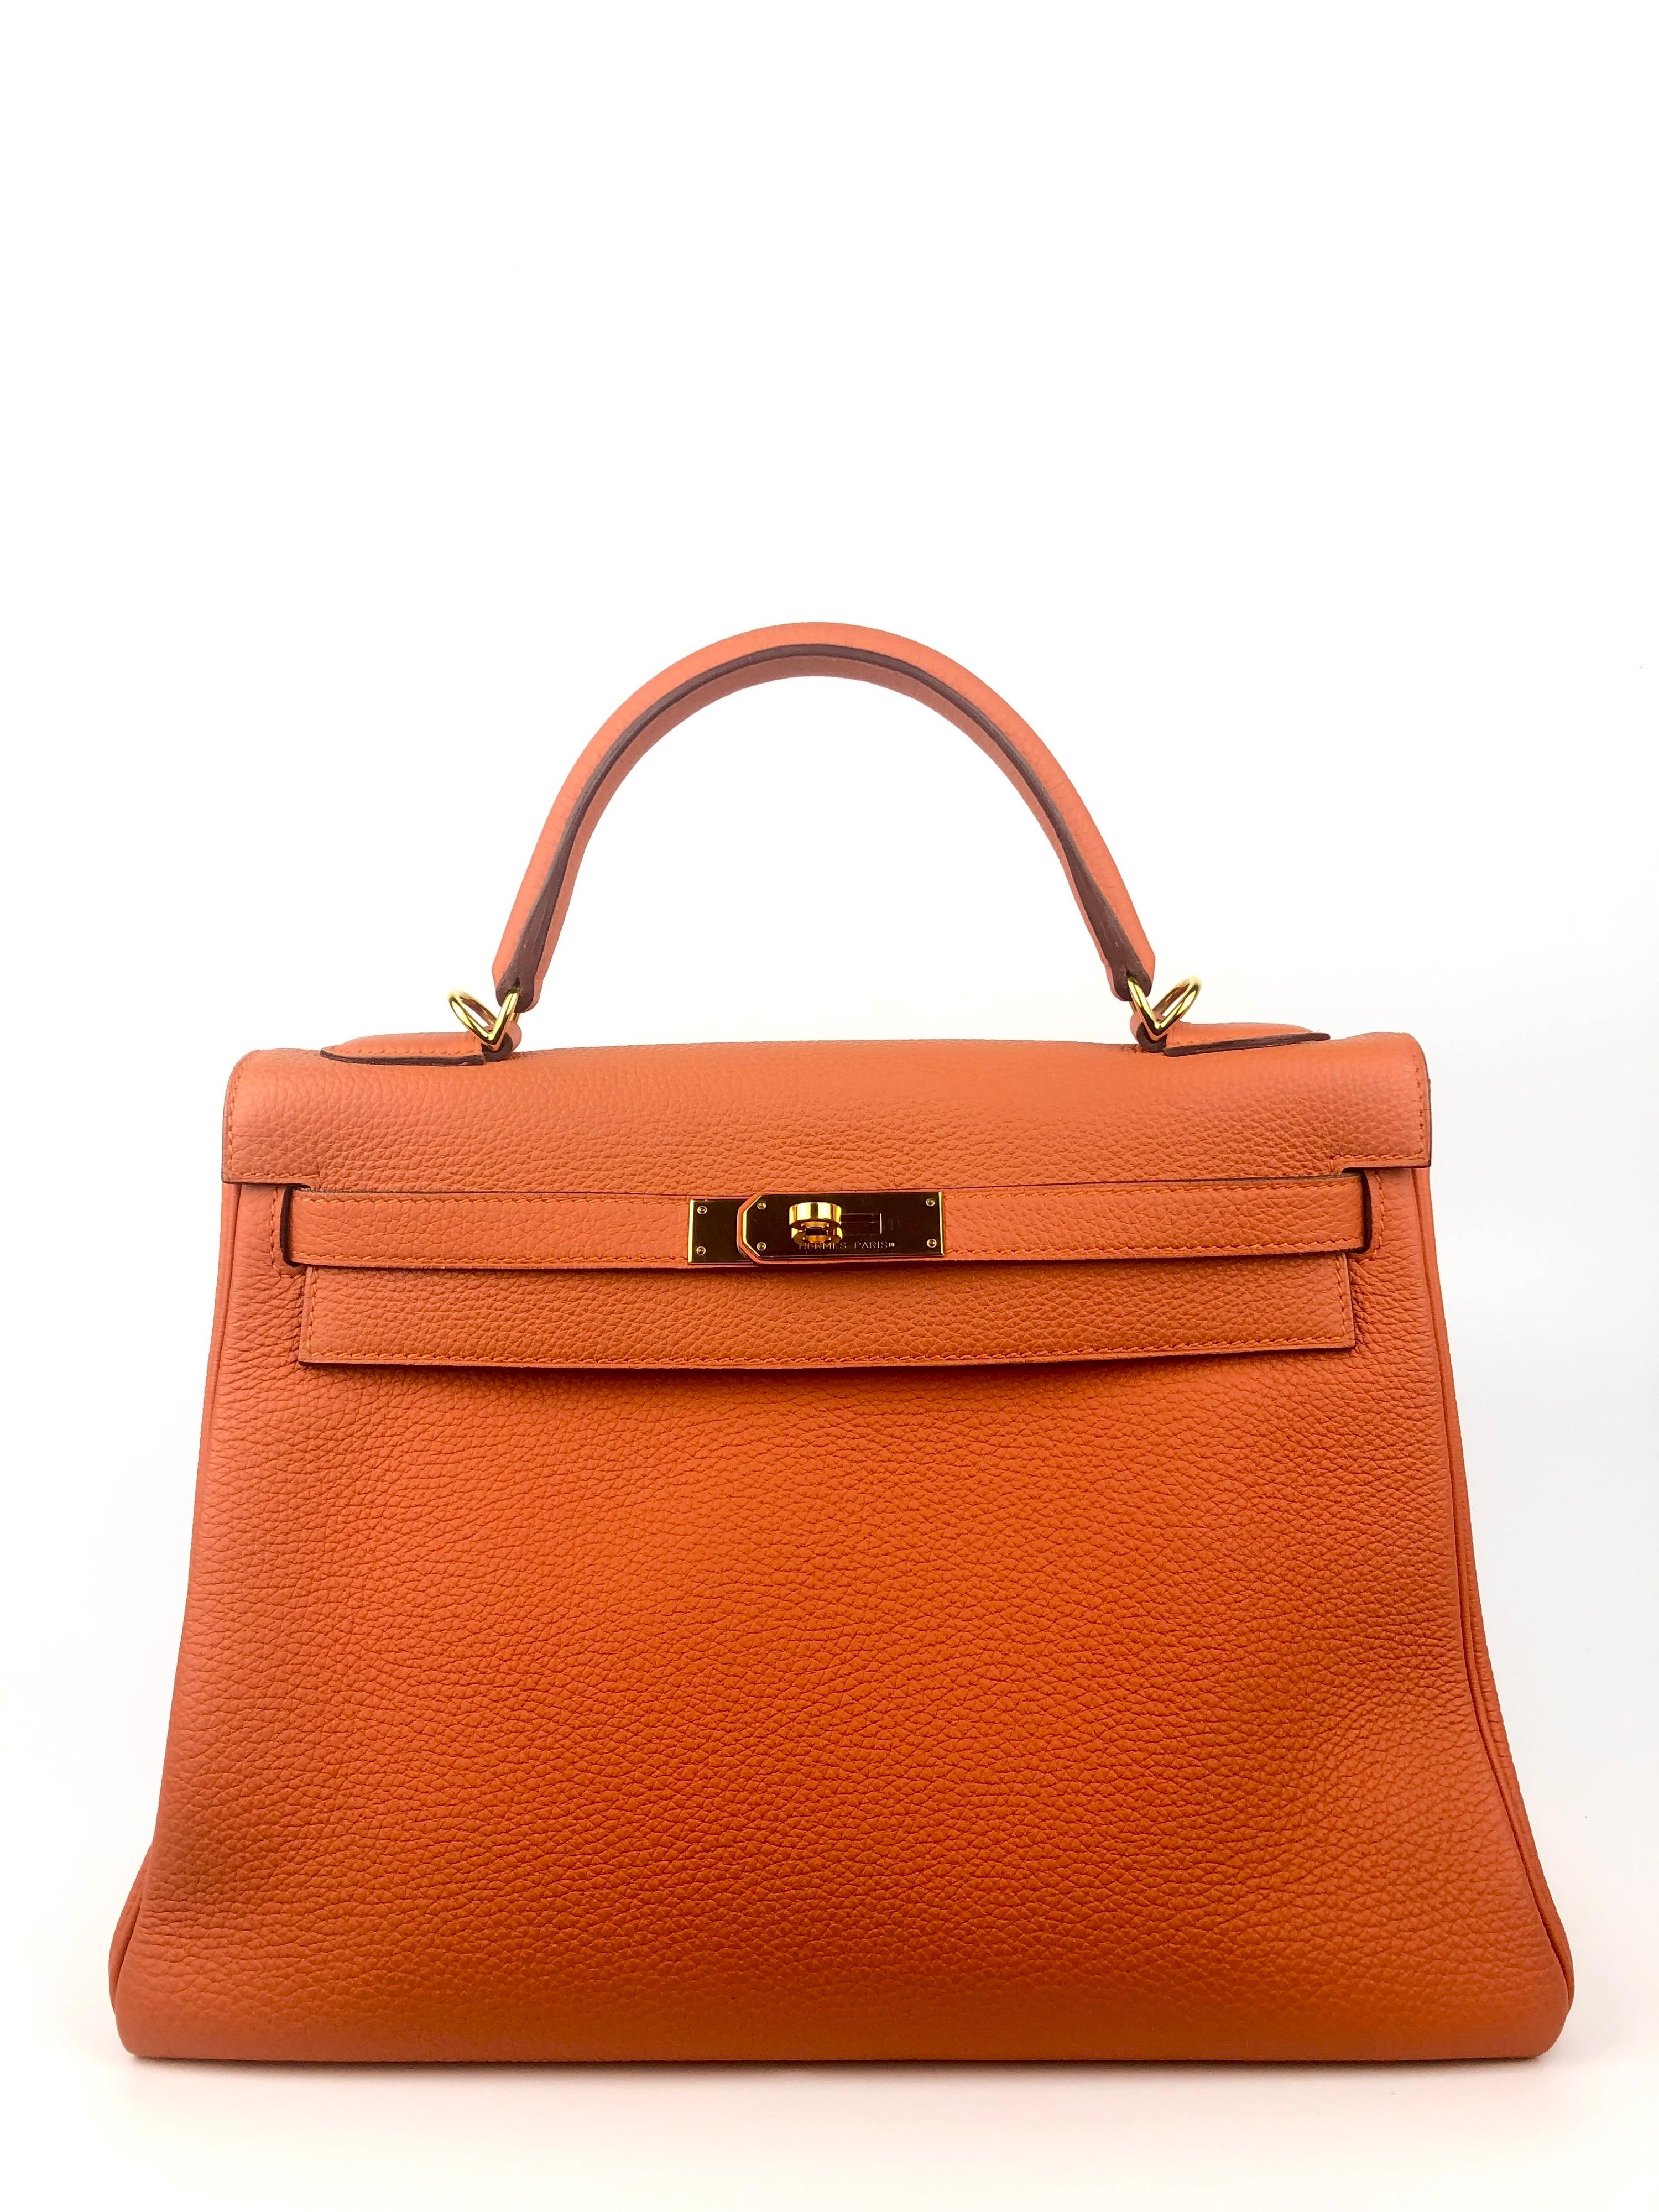 Hermes Kelly 32 Orange Togo GoldHardware. Excellent Condition, light hairlines on the hardware Plastic still on back plate hardware. Q stamp 2013.

Shop with confidence from Lux Addicts. Authenticity guaranteed! 